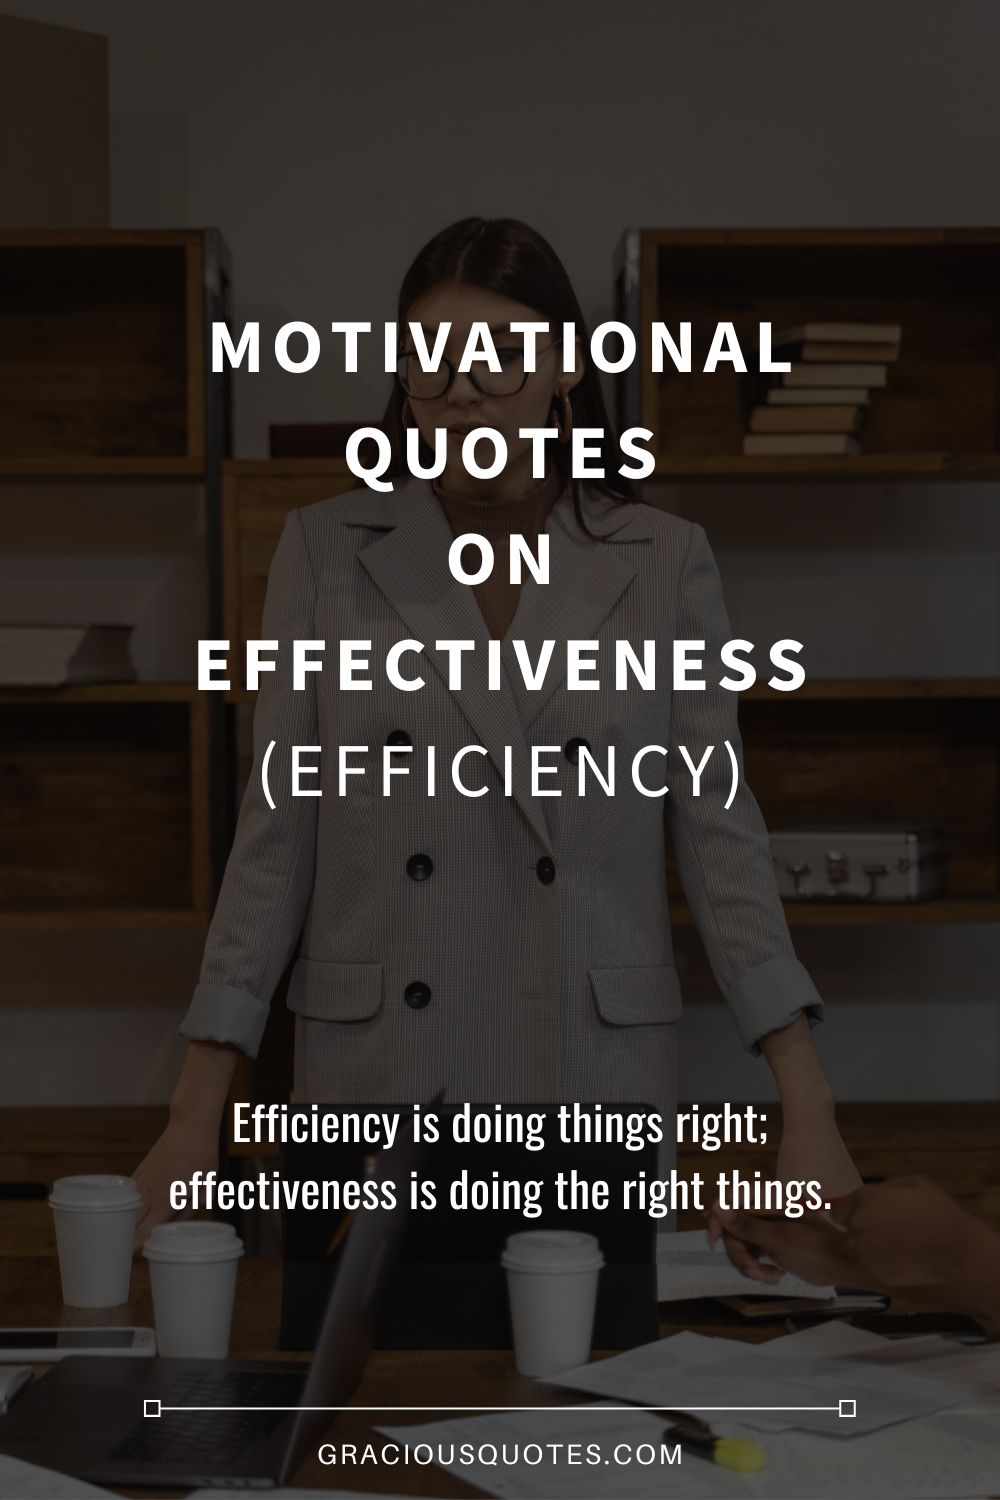 Motivational Quotes on Effectiveness (EFFICIENCY) - Gracious Quotes